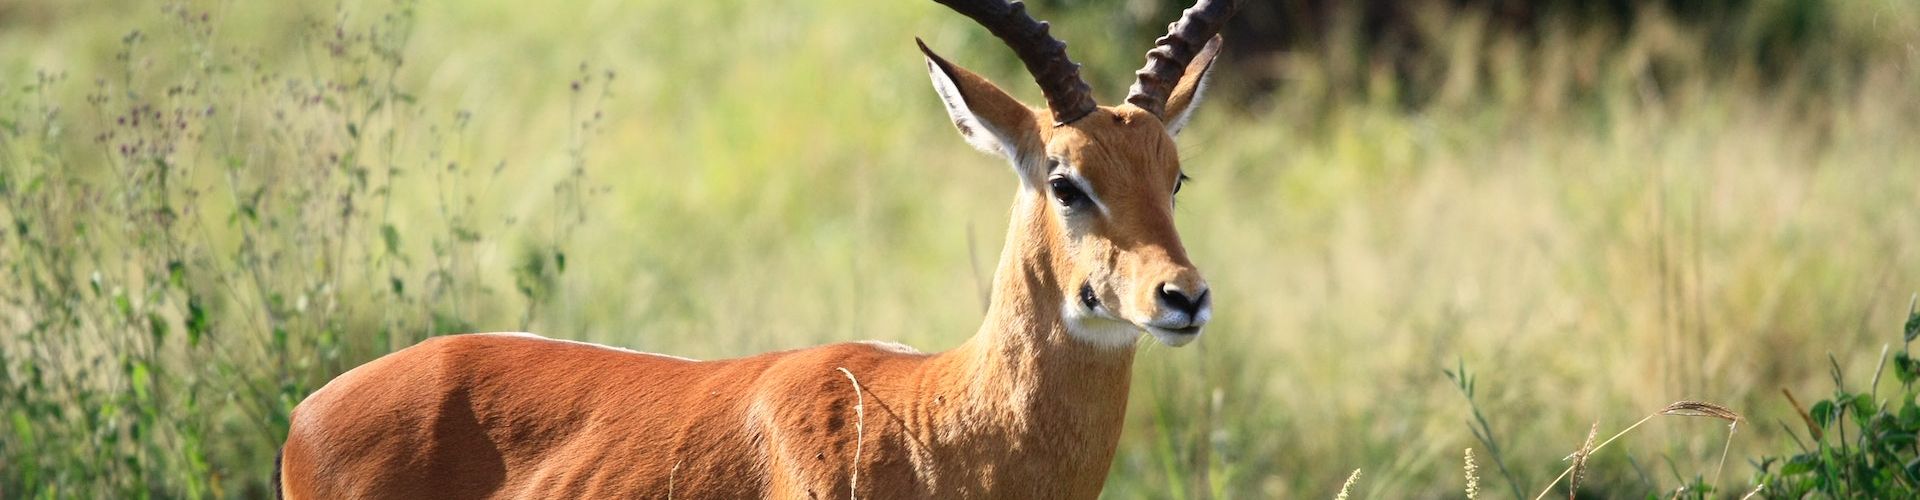 There are many types of antelope to be spotted while on Safari in Tanzania